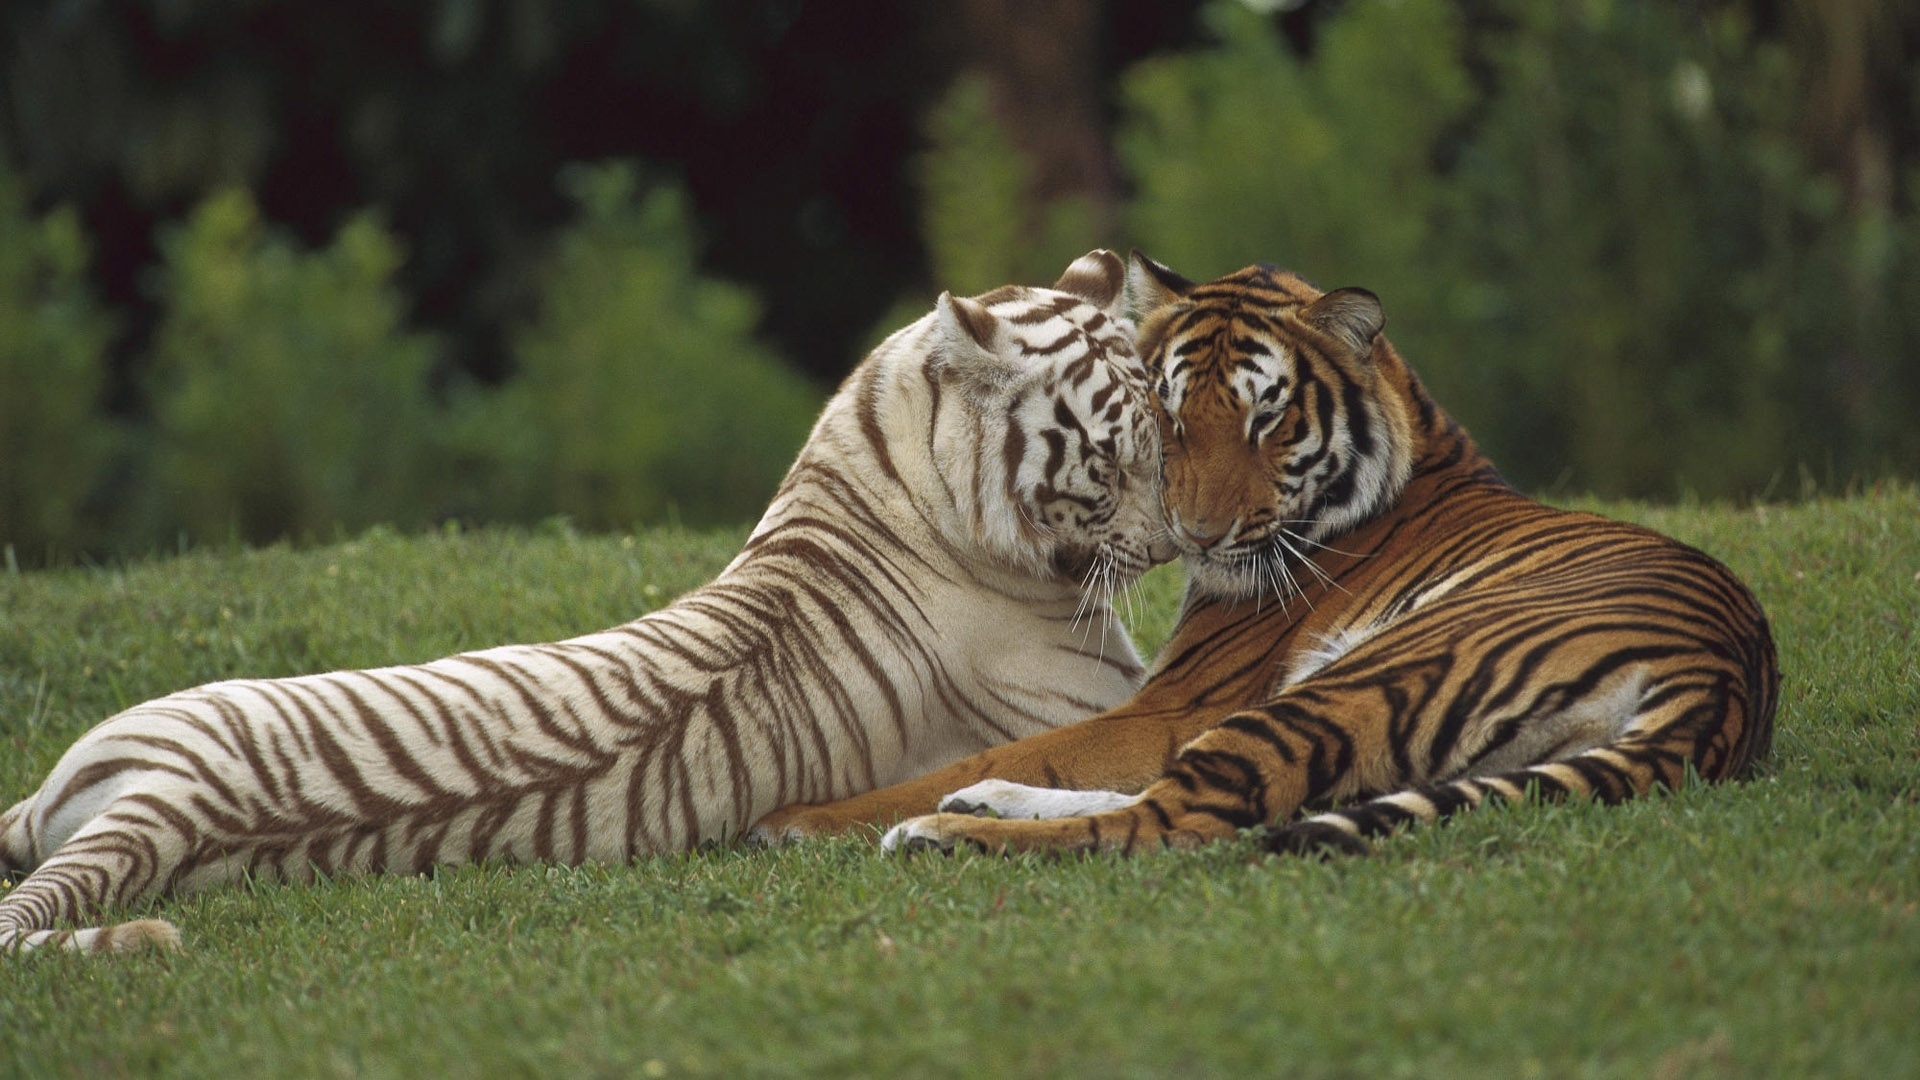 Two Tigers for 1920 x 1080 HDTV 1080p resolution